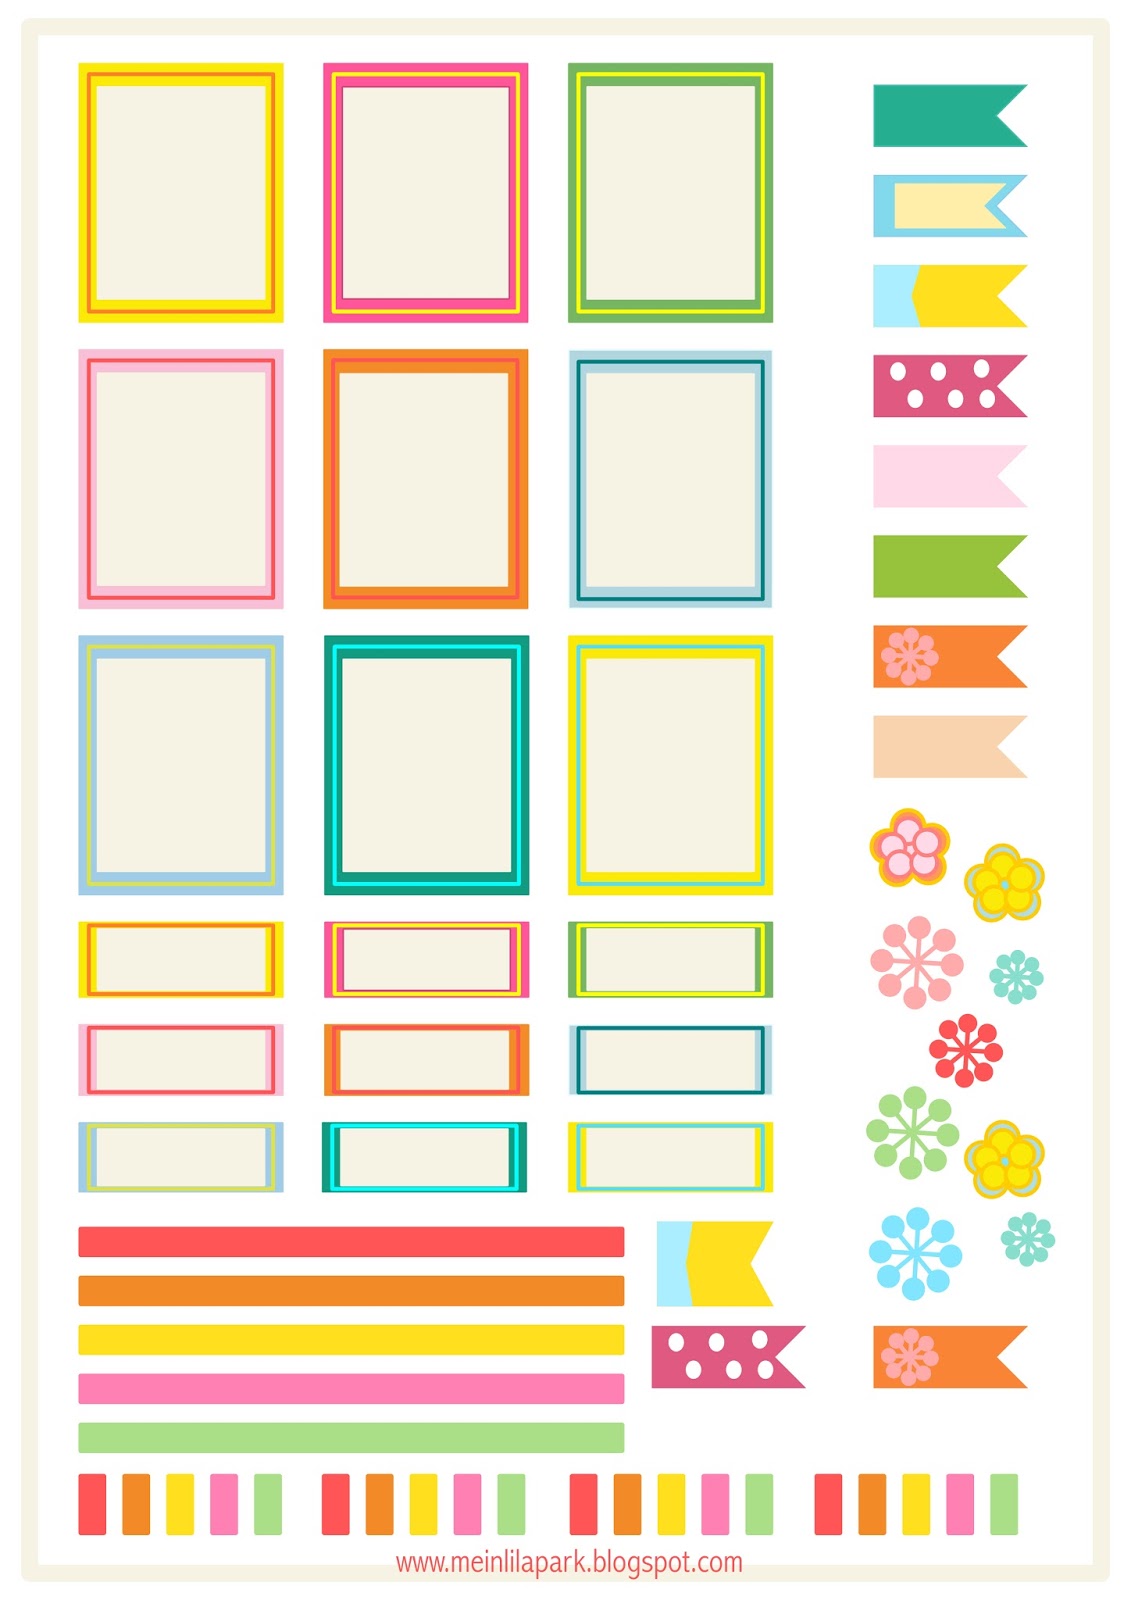 Free Printable Planner Stickers - Printable World Holiday